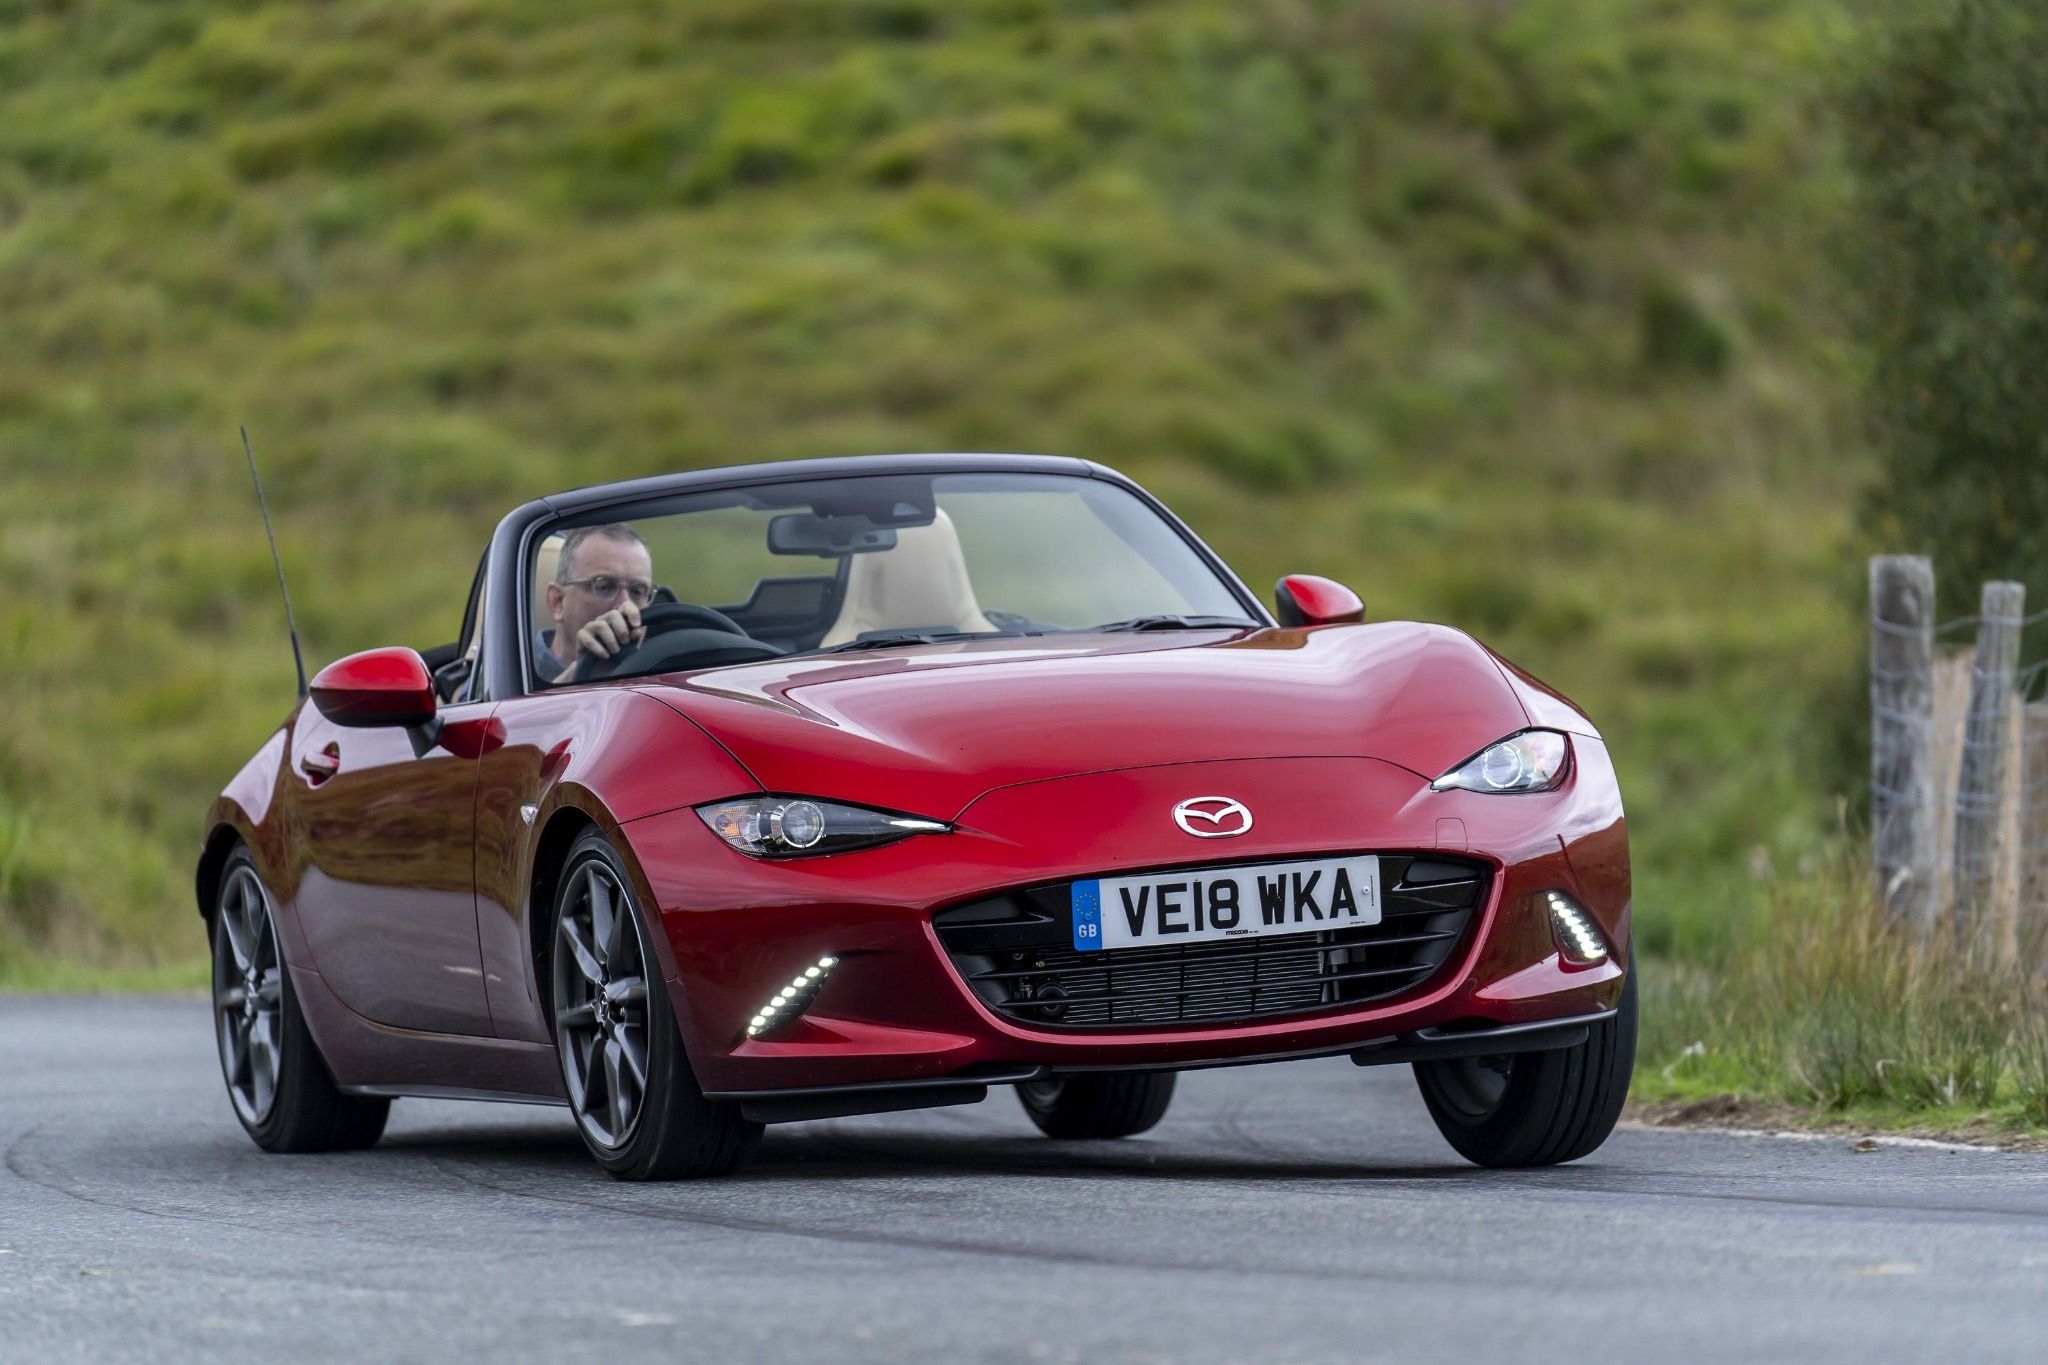 Red Mazda MX-5 driving on a road